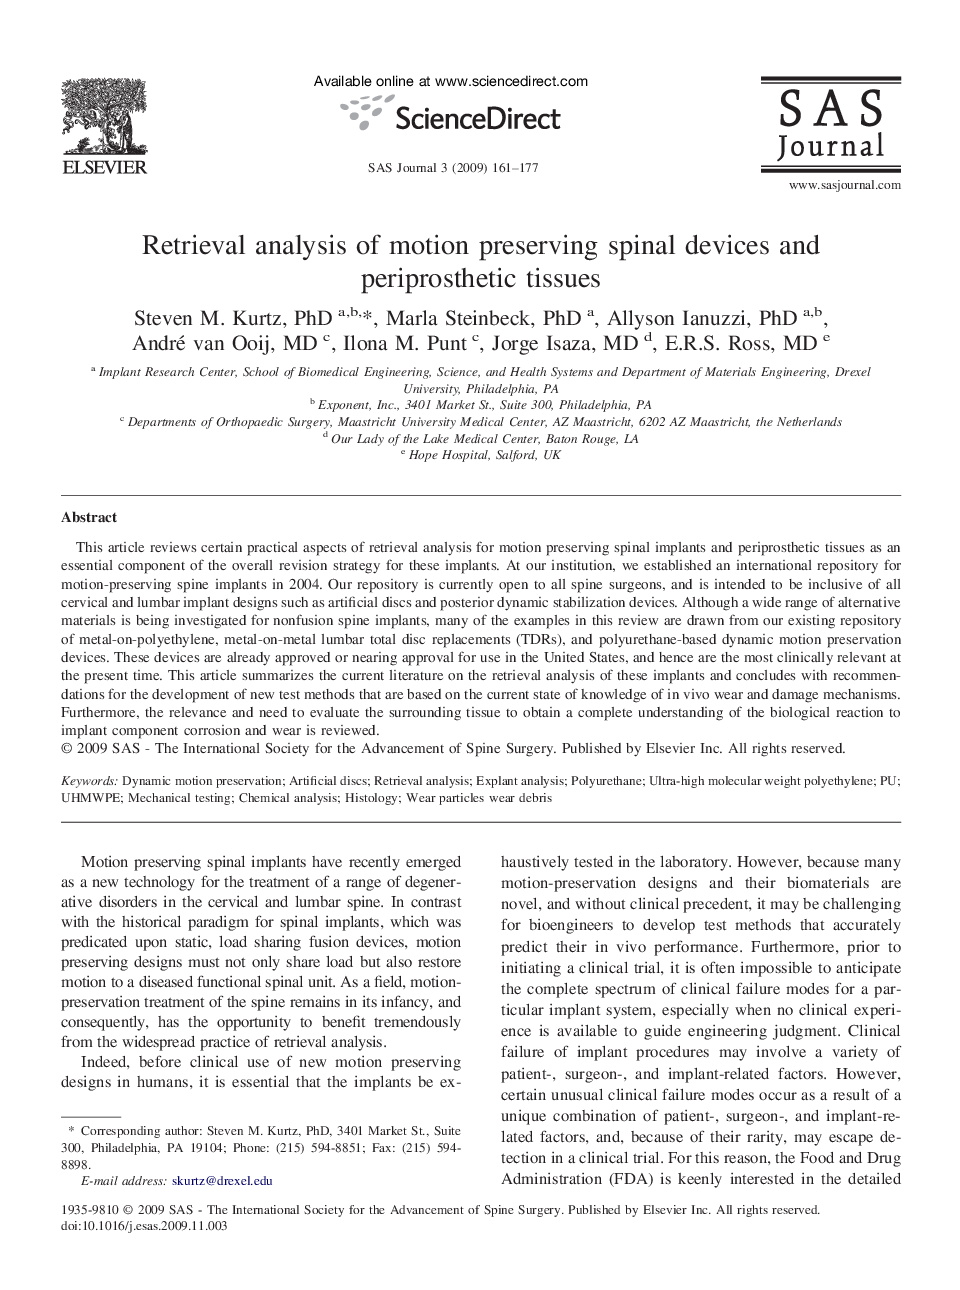 Retrieval analysis of motion preserving spinal devices and periprosthetic tissues